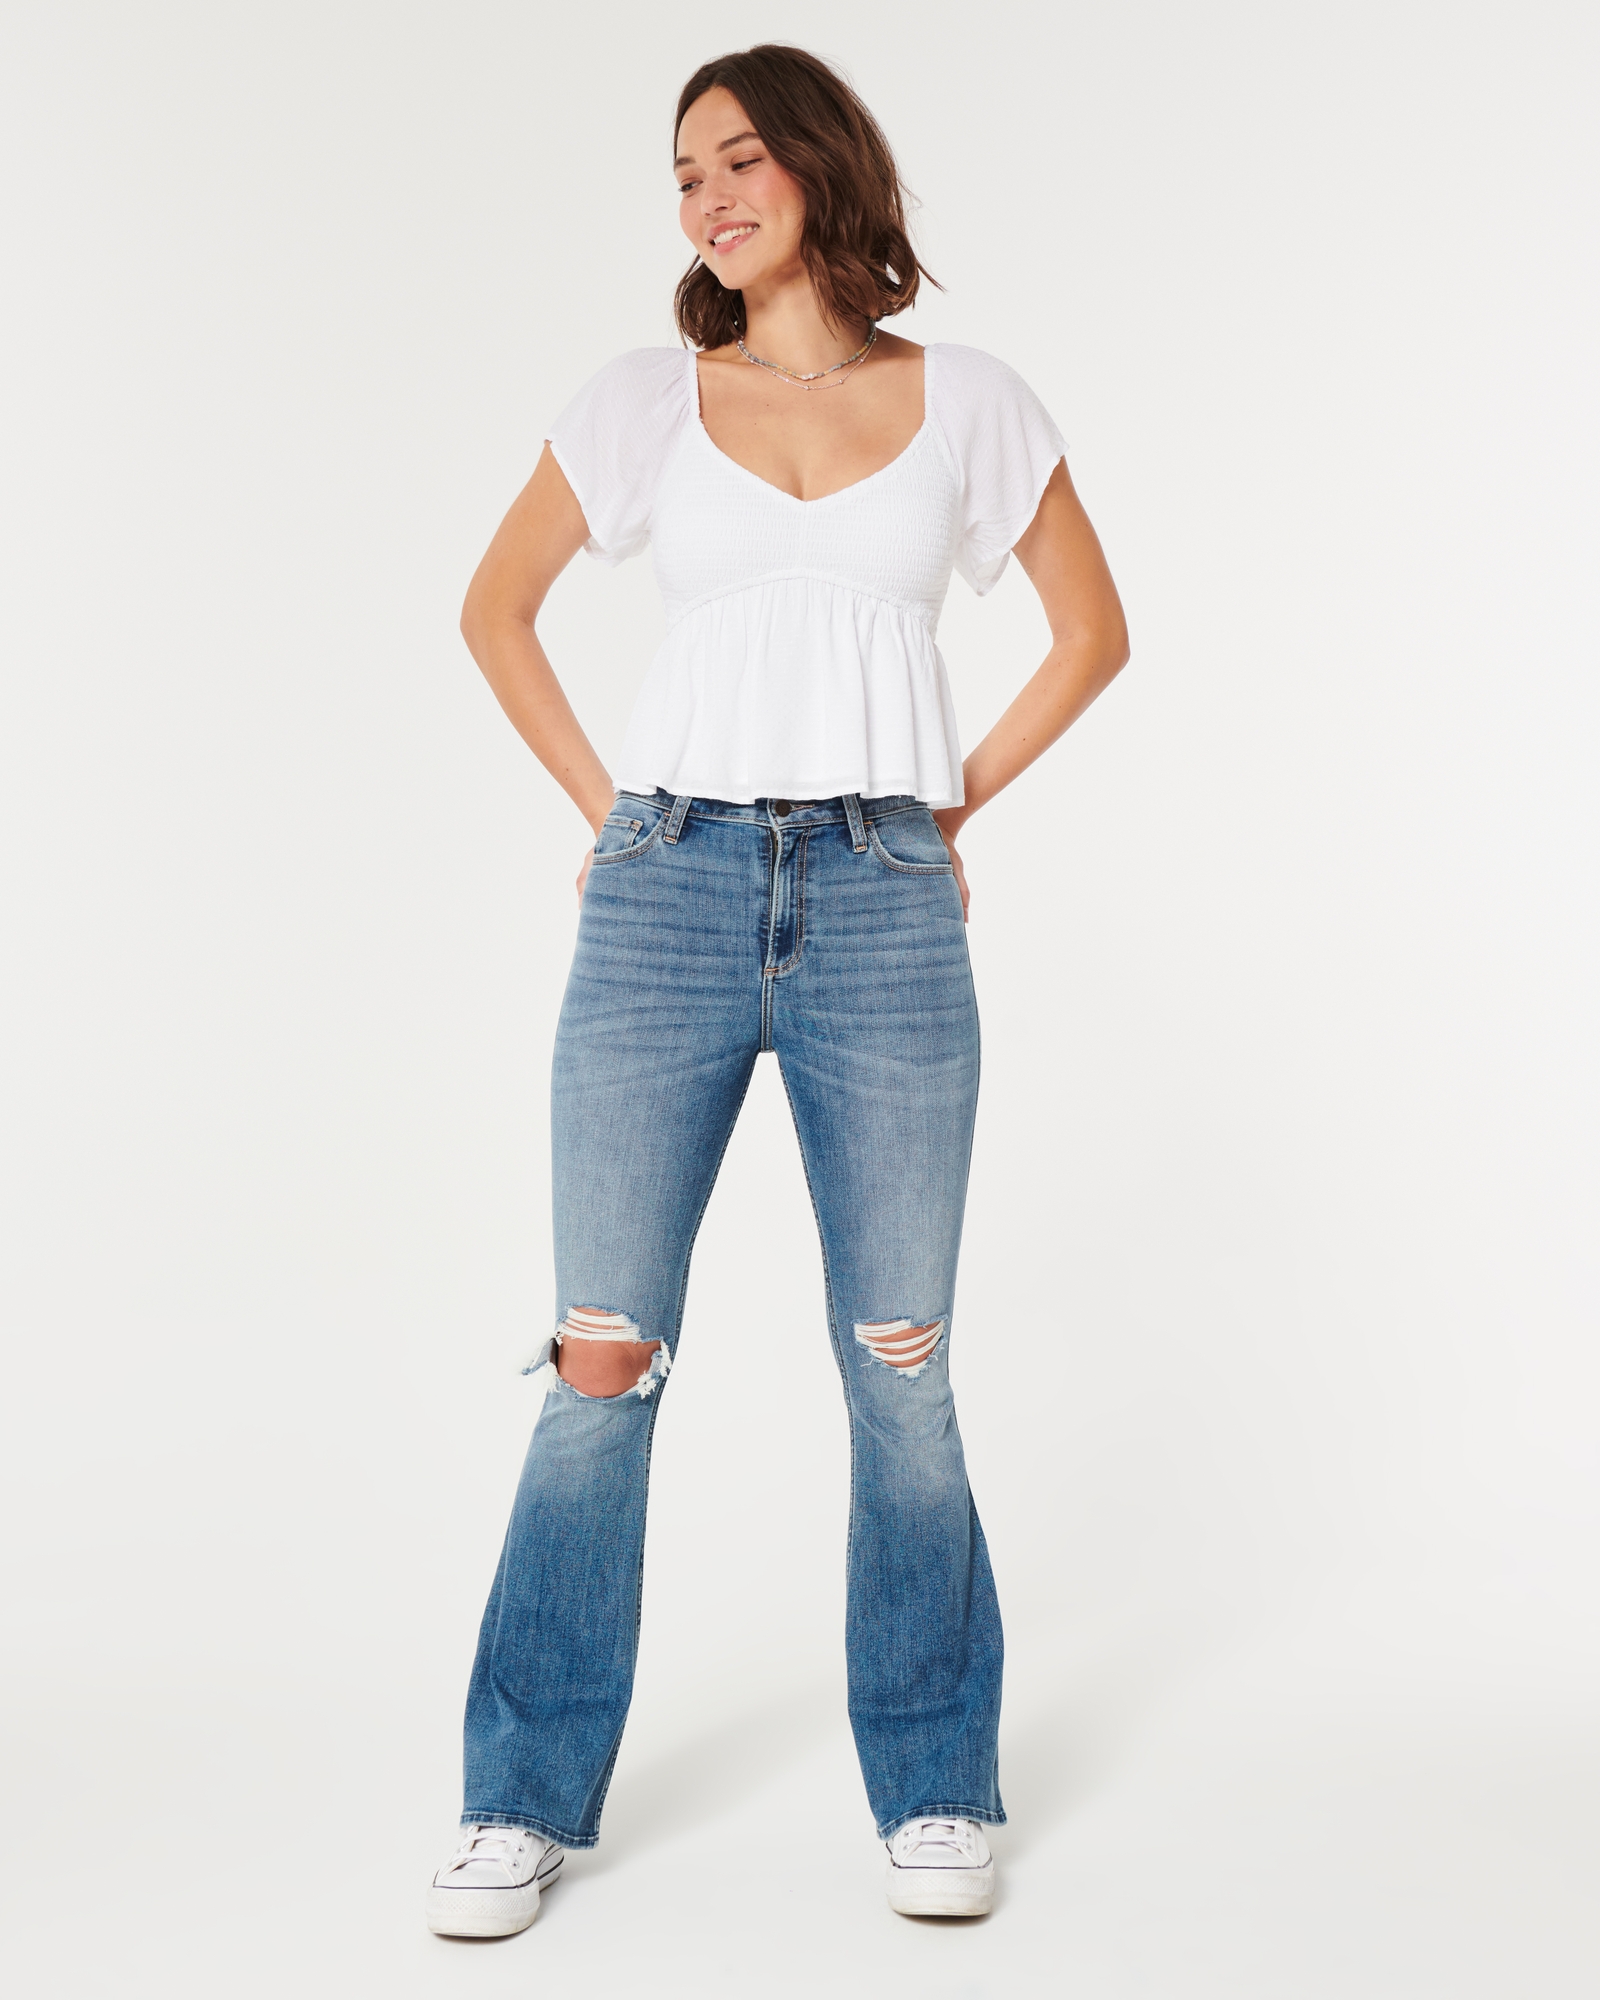 Women's High-Rise Ripped Medium Wash Vintage Flare Jeans, Women's Sale